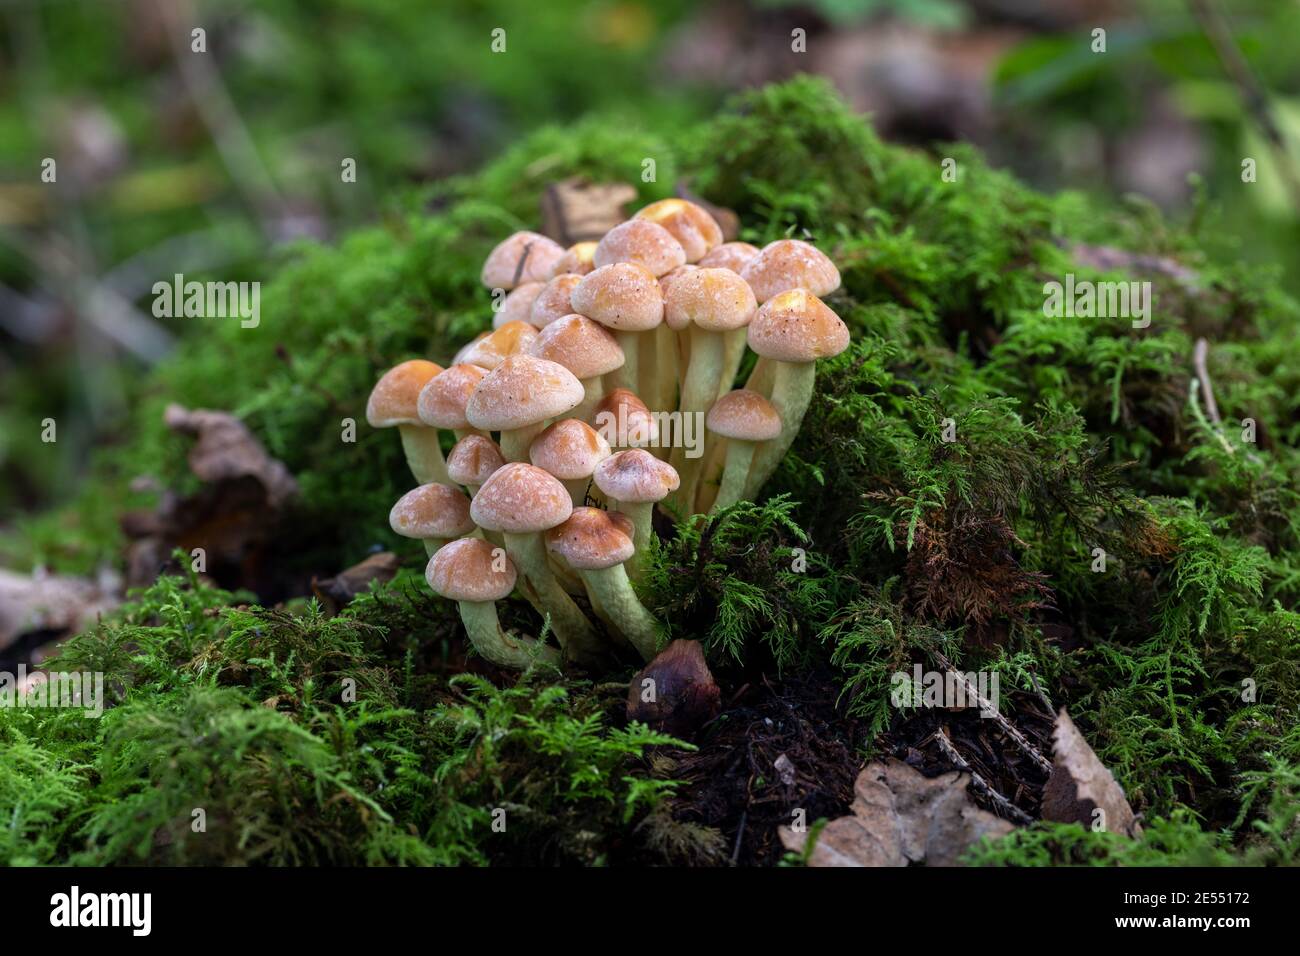 Clump of wild mushrooms / fungi (probably Sulphur Tuft – Hypholoma fasciculare) growing on moss in Clanger Woods Wiltshire, England, UK in October. Stock Photo